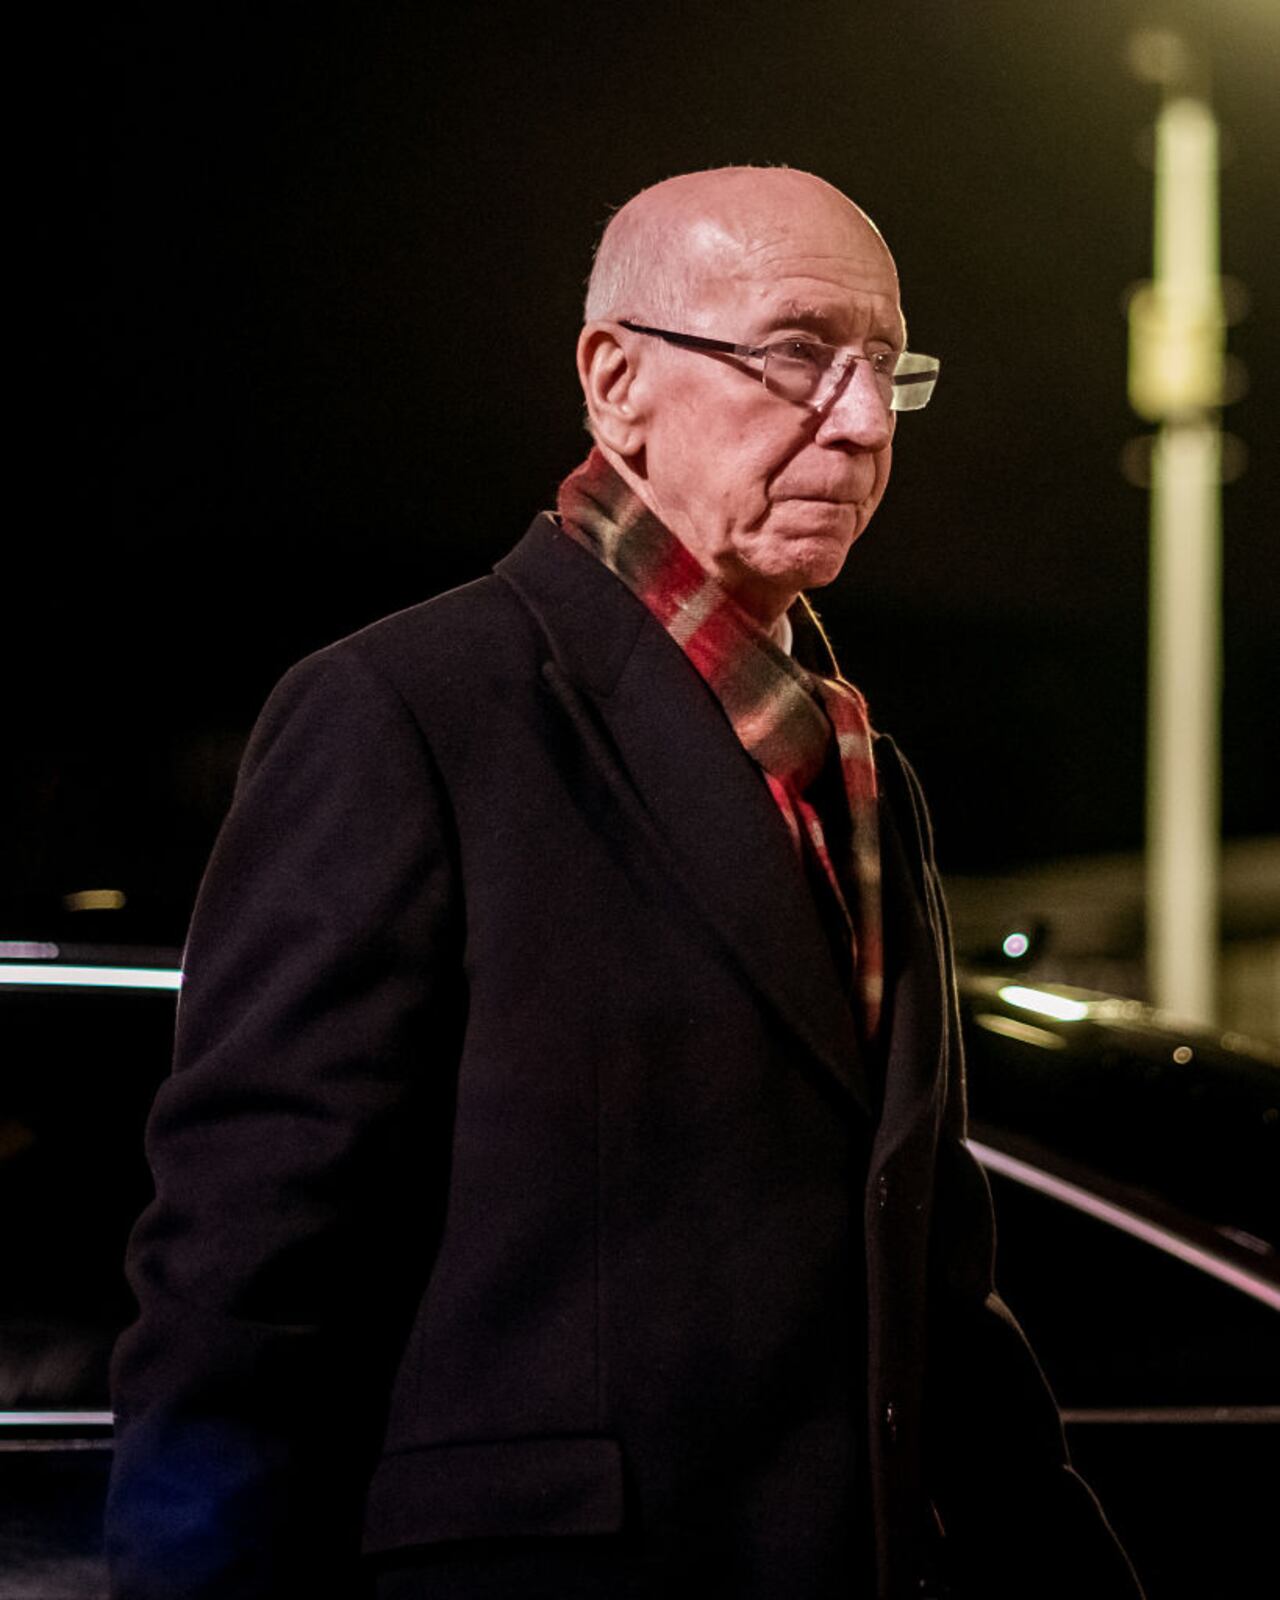 MANCHESTER, ENGLAND - DECEMBER 12: (EDITOR'S NOTE: Image processed using a digital filter) Sir Bobby Charlton of Manchester United arrives ahead of the UEFA Europa League group L match between Manchester United and AZ Alkmaar at Old Trafford on December 12, 2019 in Manchester, United Kingdom. (Photo by Ash Donelon/Manchester United via Getty Images)